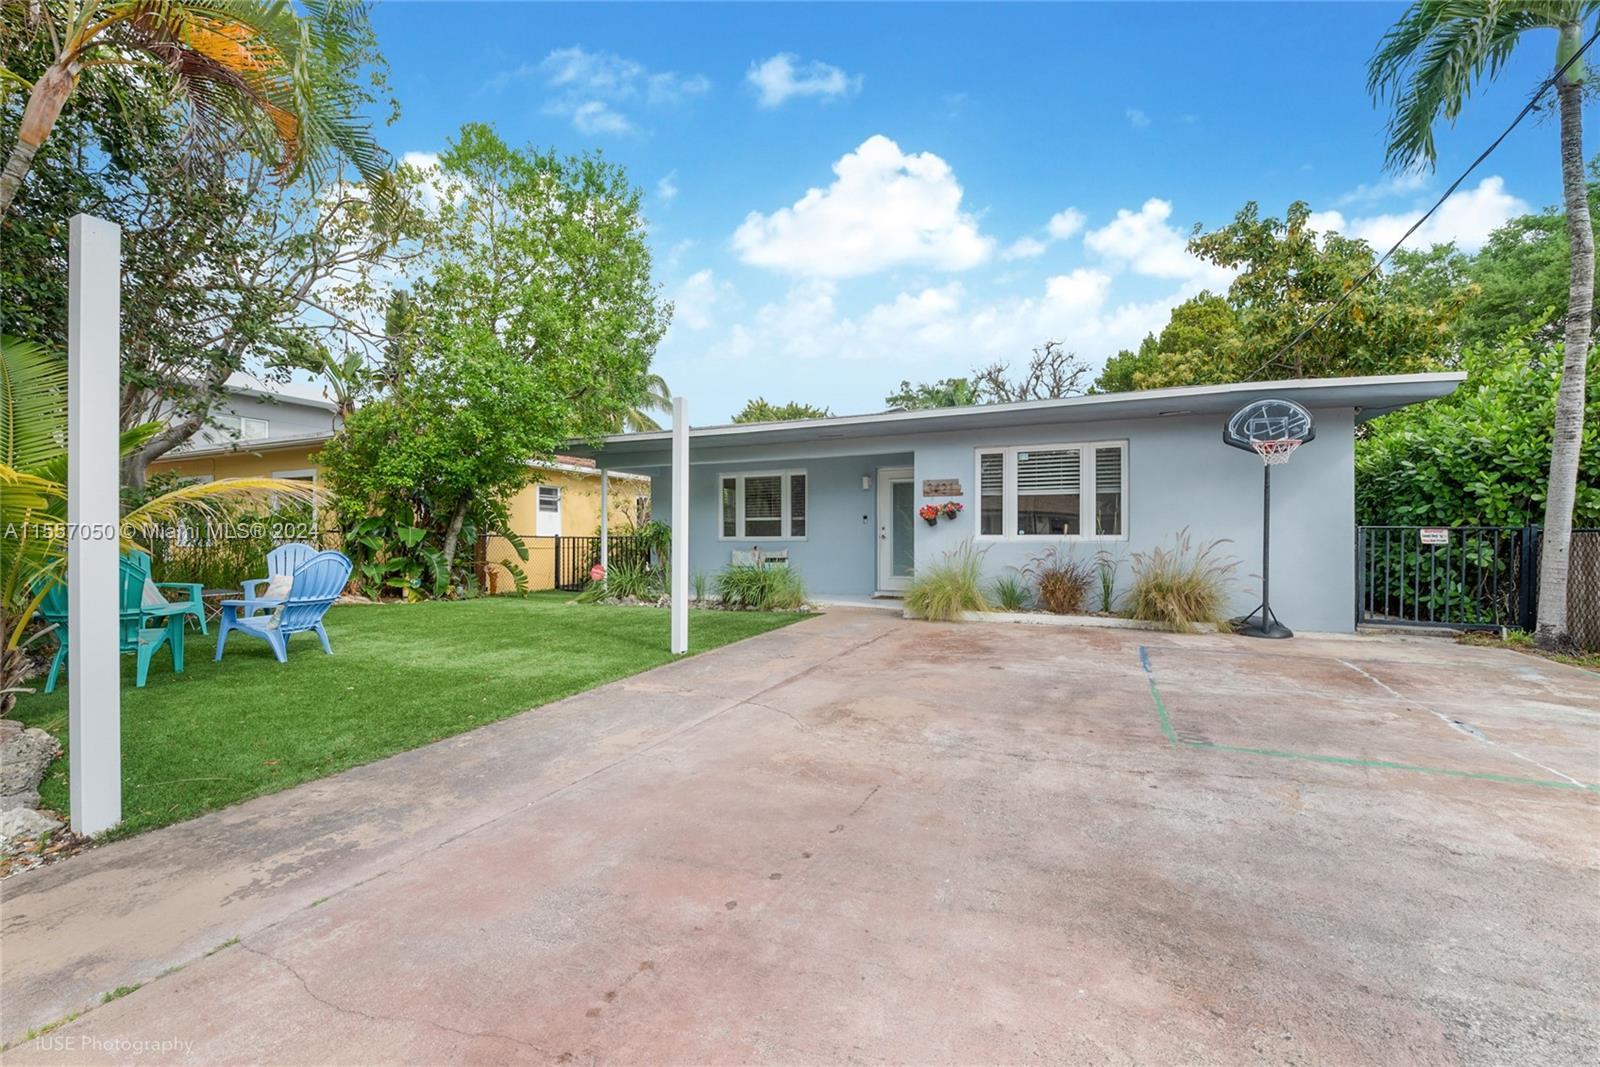 As seen on HGTV! Welcome to this beautifully remodeled property in Coconut Grove featuring 4 bedroom